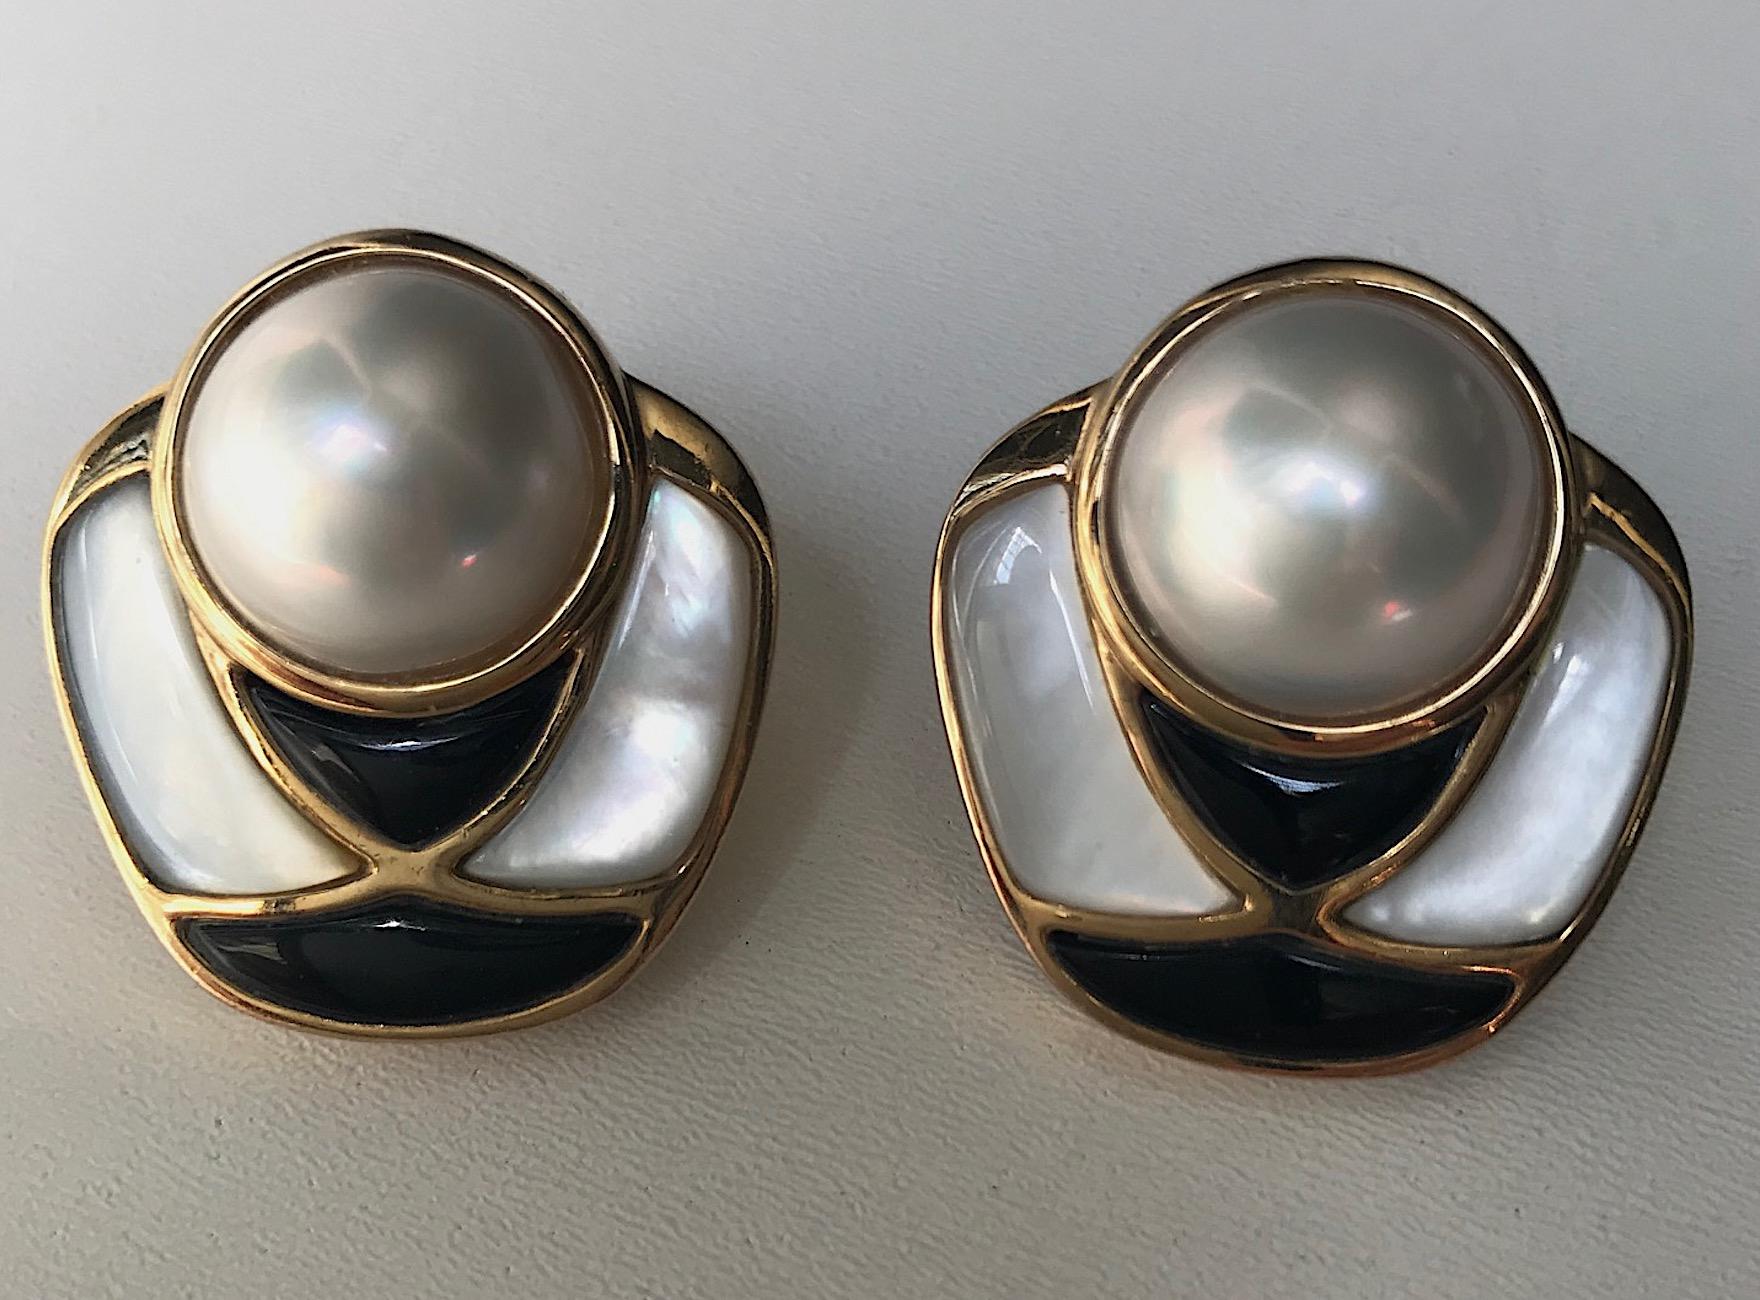 A beautifully and excellently crafted pair of earrings by international jewelry designer Kai-Yin Lo. Each earrings is comprised of a large 14 mm mabe pearl set into a vermeil (gold on sterling silver) setting. The pearl is surrounded along the sides